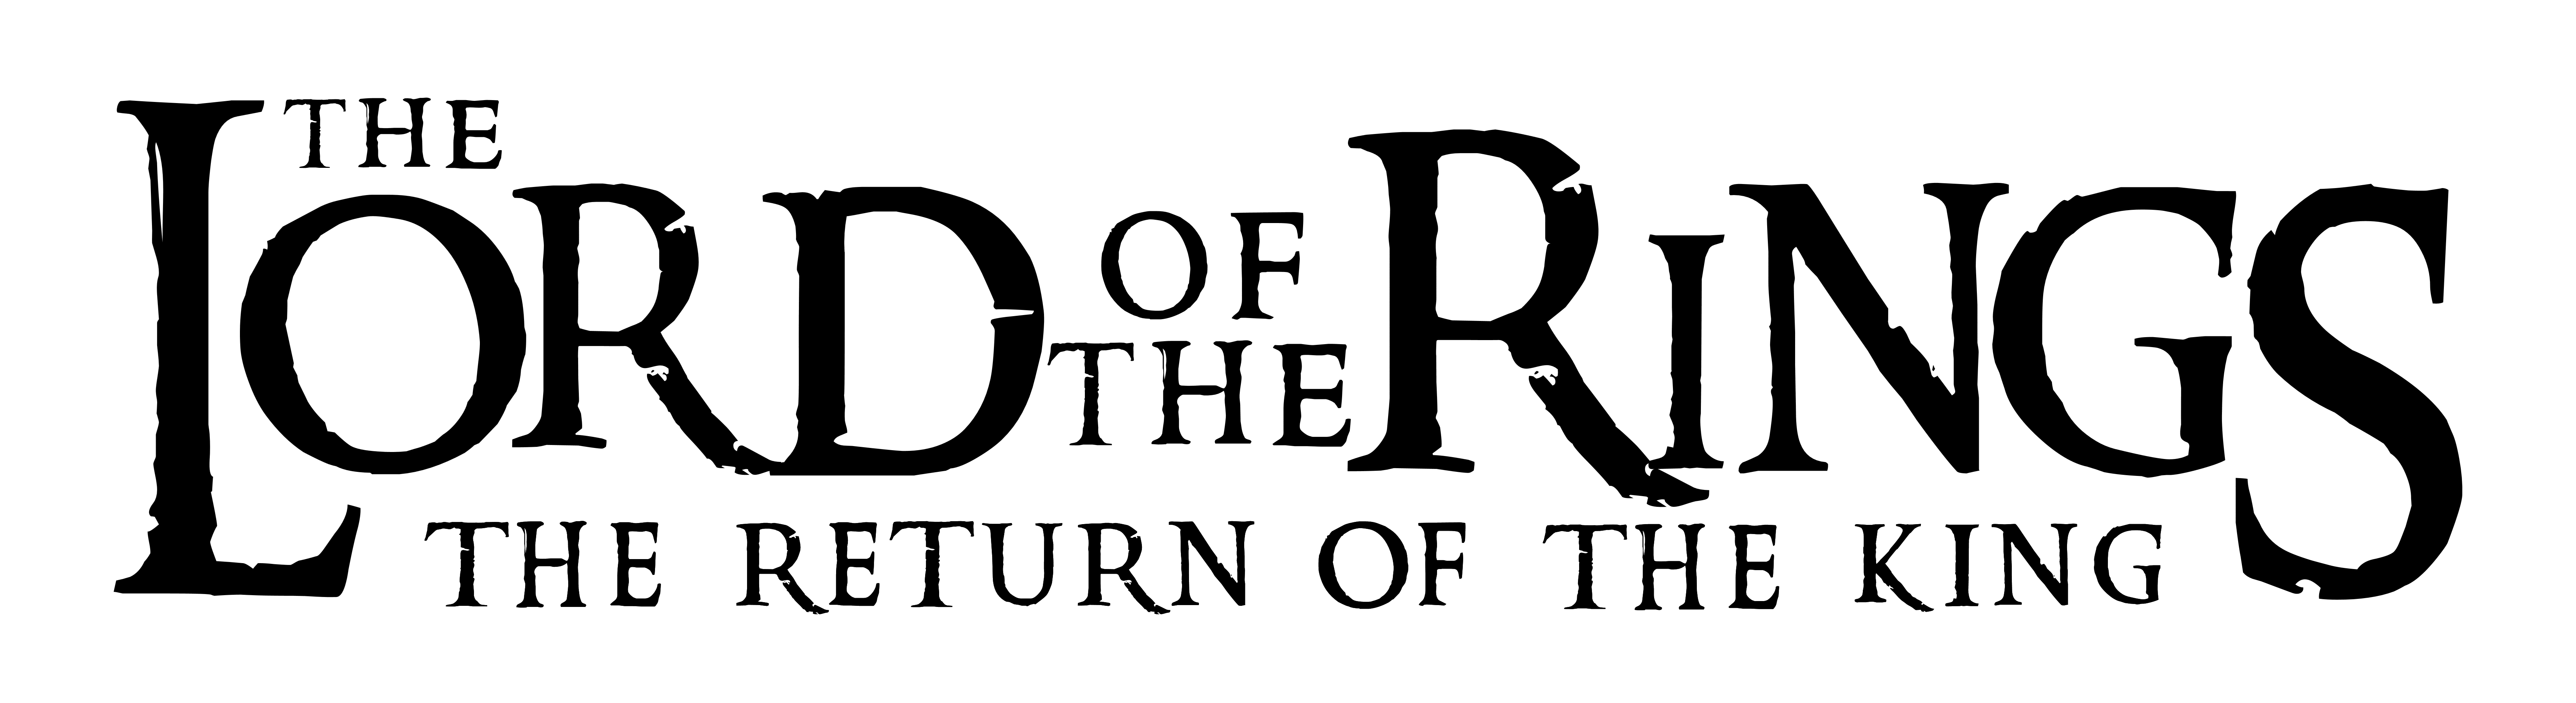 The Lord of the Rings (The Return Of The King) logo, transparent, .png